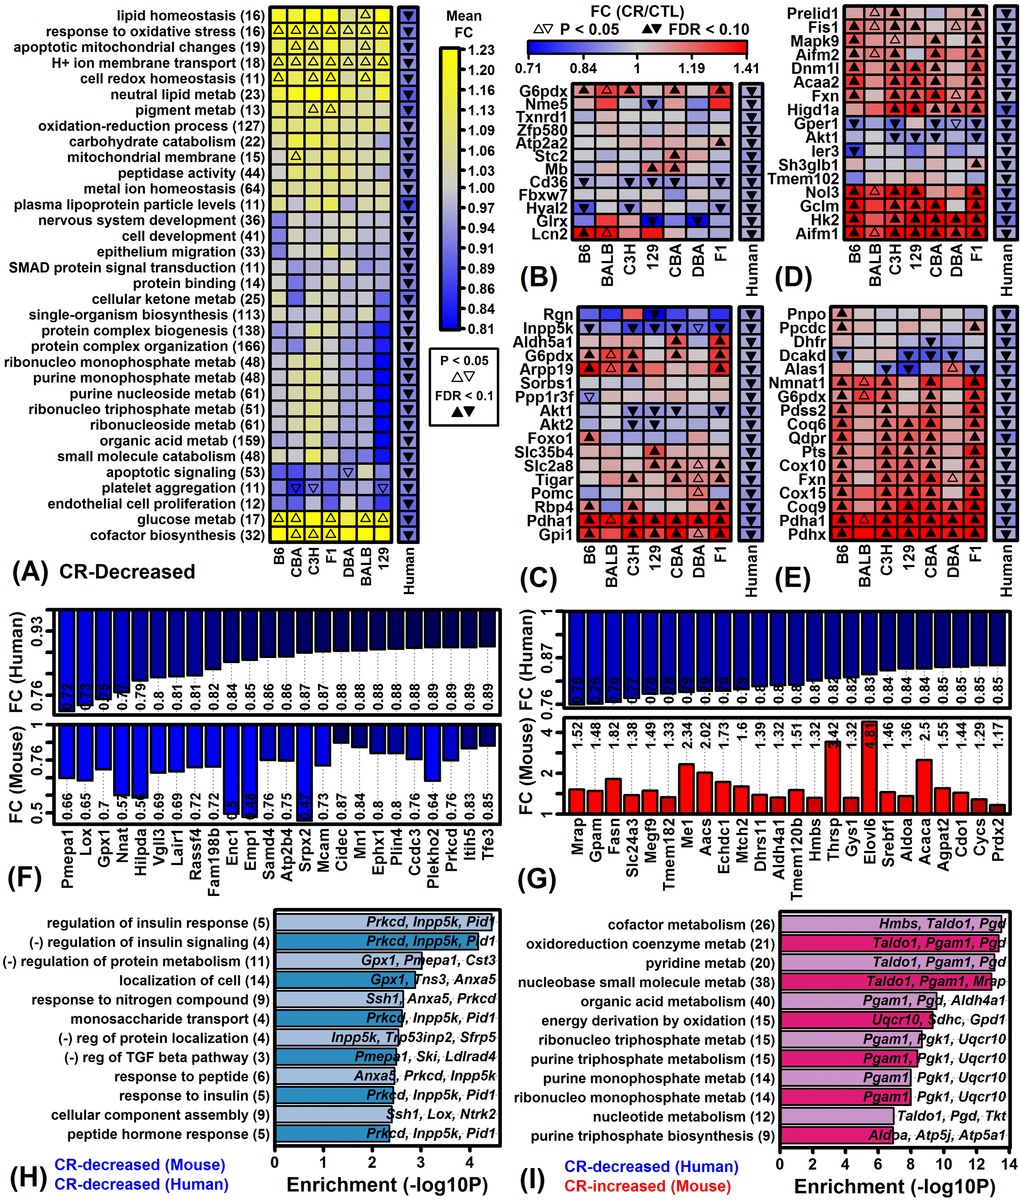 Genes decreased by CR in humans and Gene Ontology-based mouse comparison. (A) GO BP terms most strongly enriched among genes decreased by CR across 28 human experiments. (B) Genes associated with response to oxidative stress (GO:0006979). (C) Genes associated with glucose metabolic process (GO:0006006). (D) Genes associated with apoptotic mitochondrial changes (GO:0008637). (E) Genes associated with cofactor biosynthesis (GO:0051188). (F) Genes most strongly decreased by CR in humans and mice. (G) Genes decreased by CR in humans but increased in mice. In (F) and (G), color-coded bars show average FC estimates in humans (top) and mice (bottom). Average FC estimates are listed within each figure. (H) GO BP terms enriched among 74 genes decreased by CR in humans and mice. Genes were decreased by 5% on average in humans (FDR I) GO BP terms enriched among 233 genes decreased by CR in humans but increased by CR in mice. Genes were decreased by 5% on average in humans (FDR 